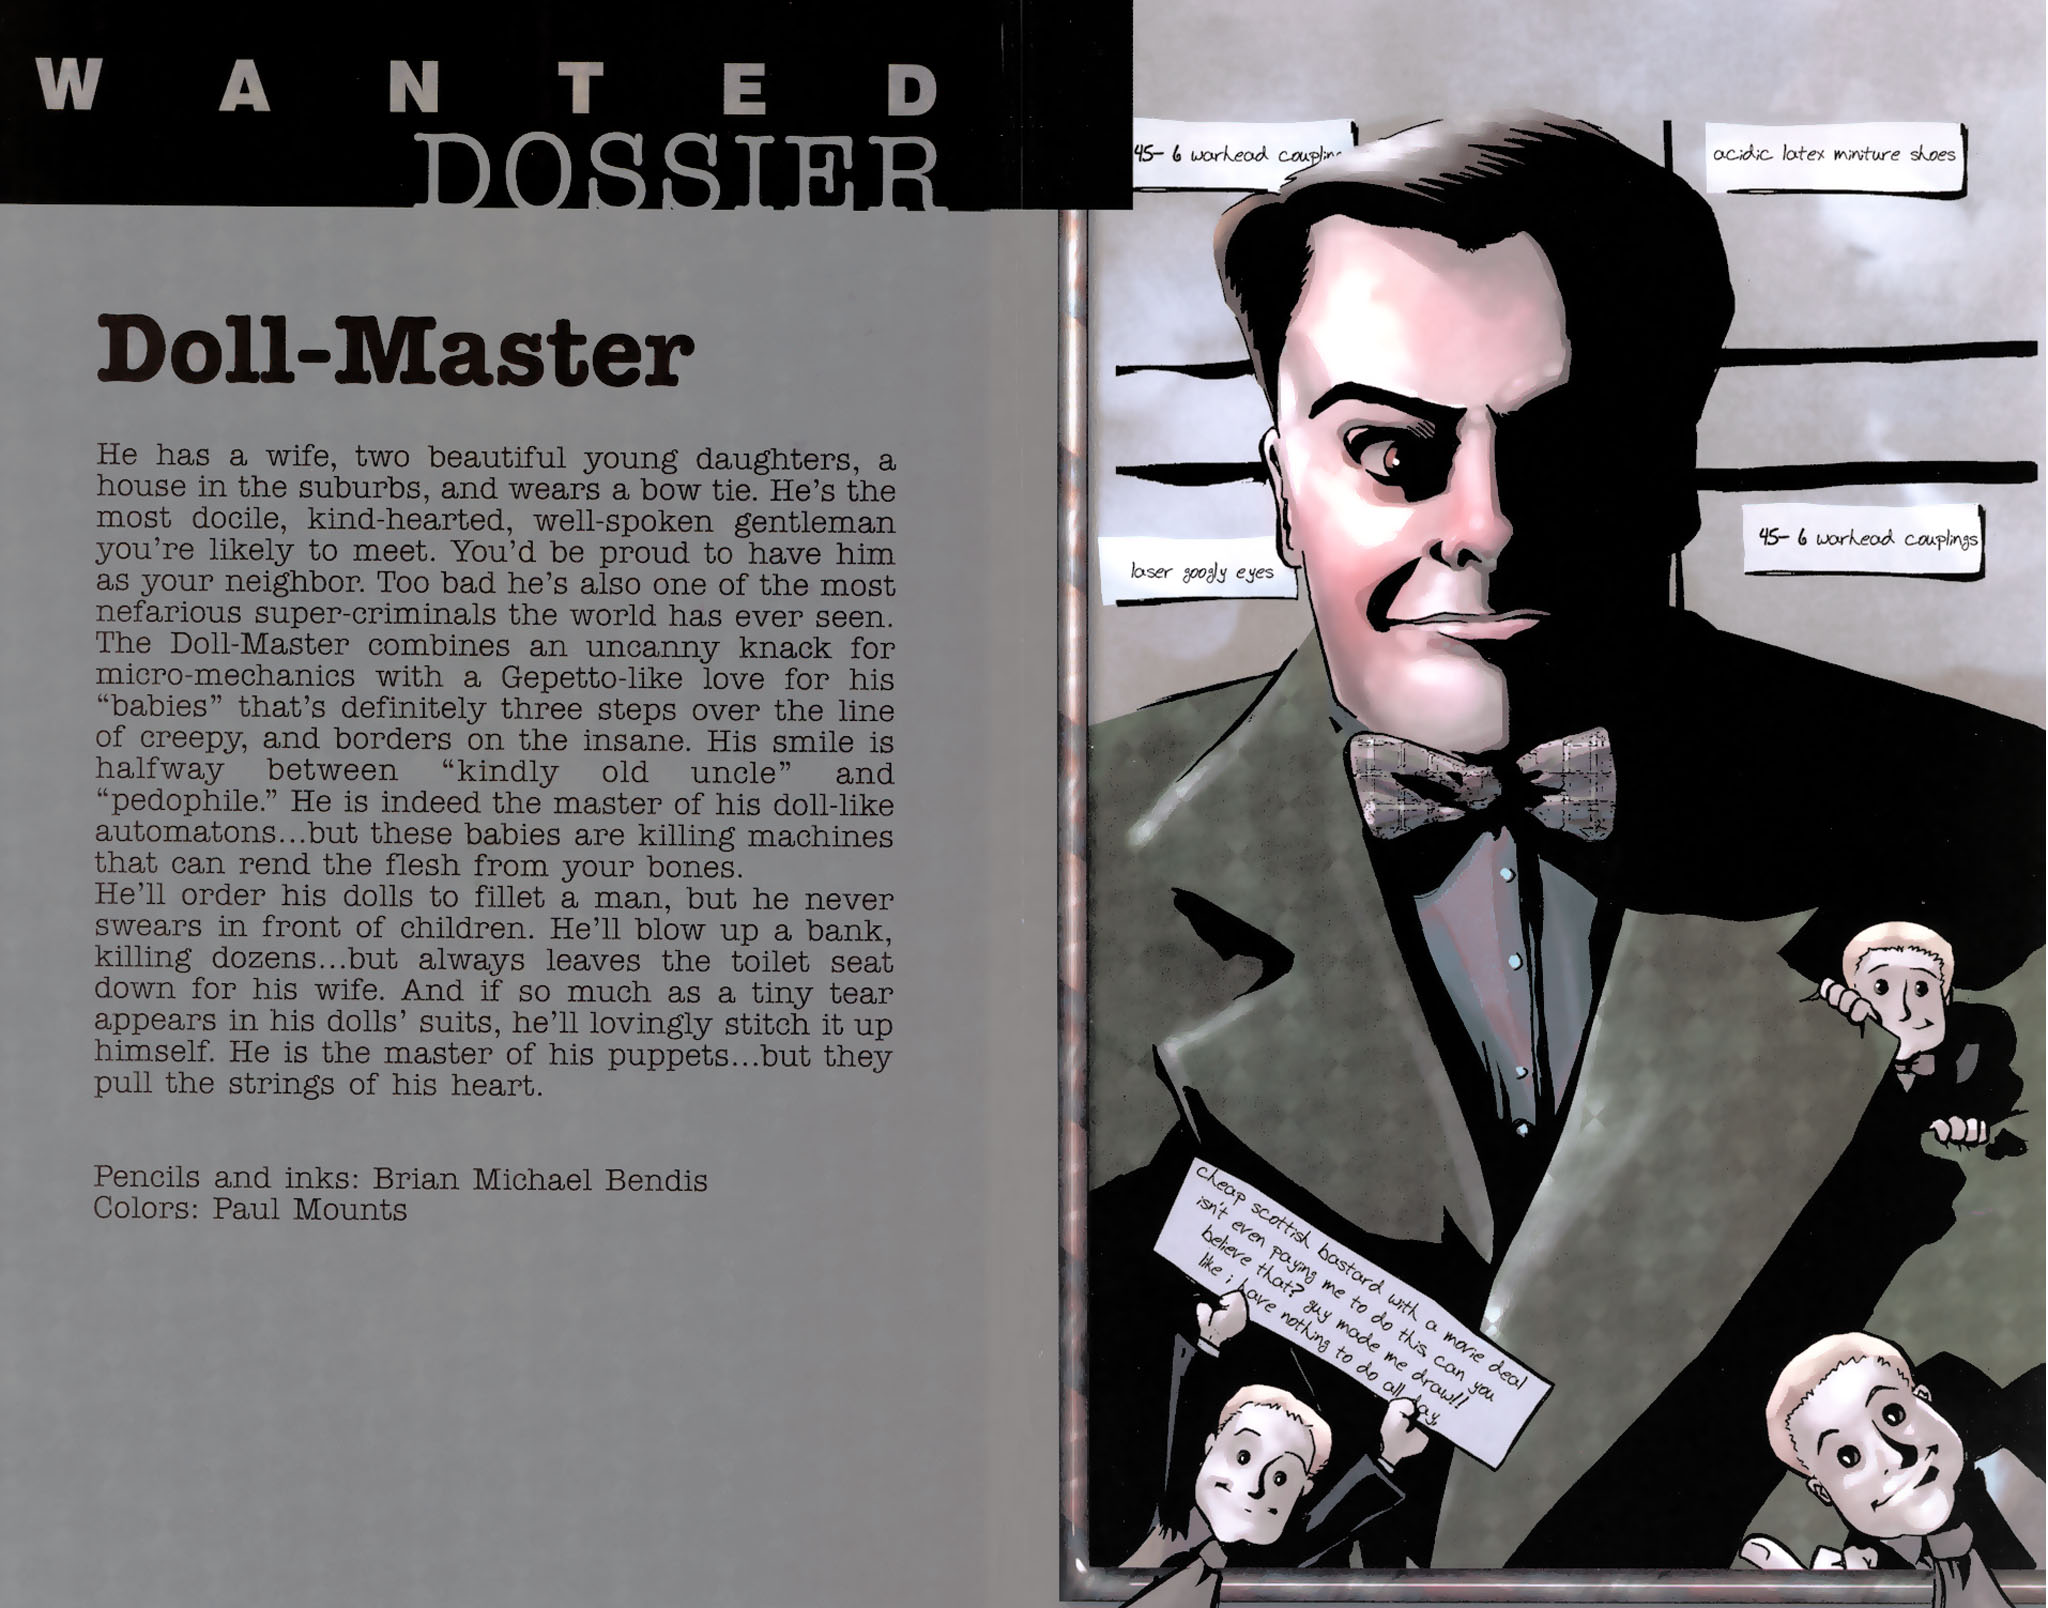 Read online Wanted Dossier comic -  Issue # Full - 12